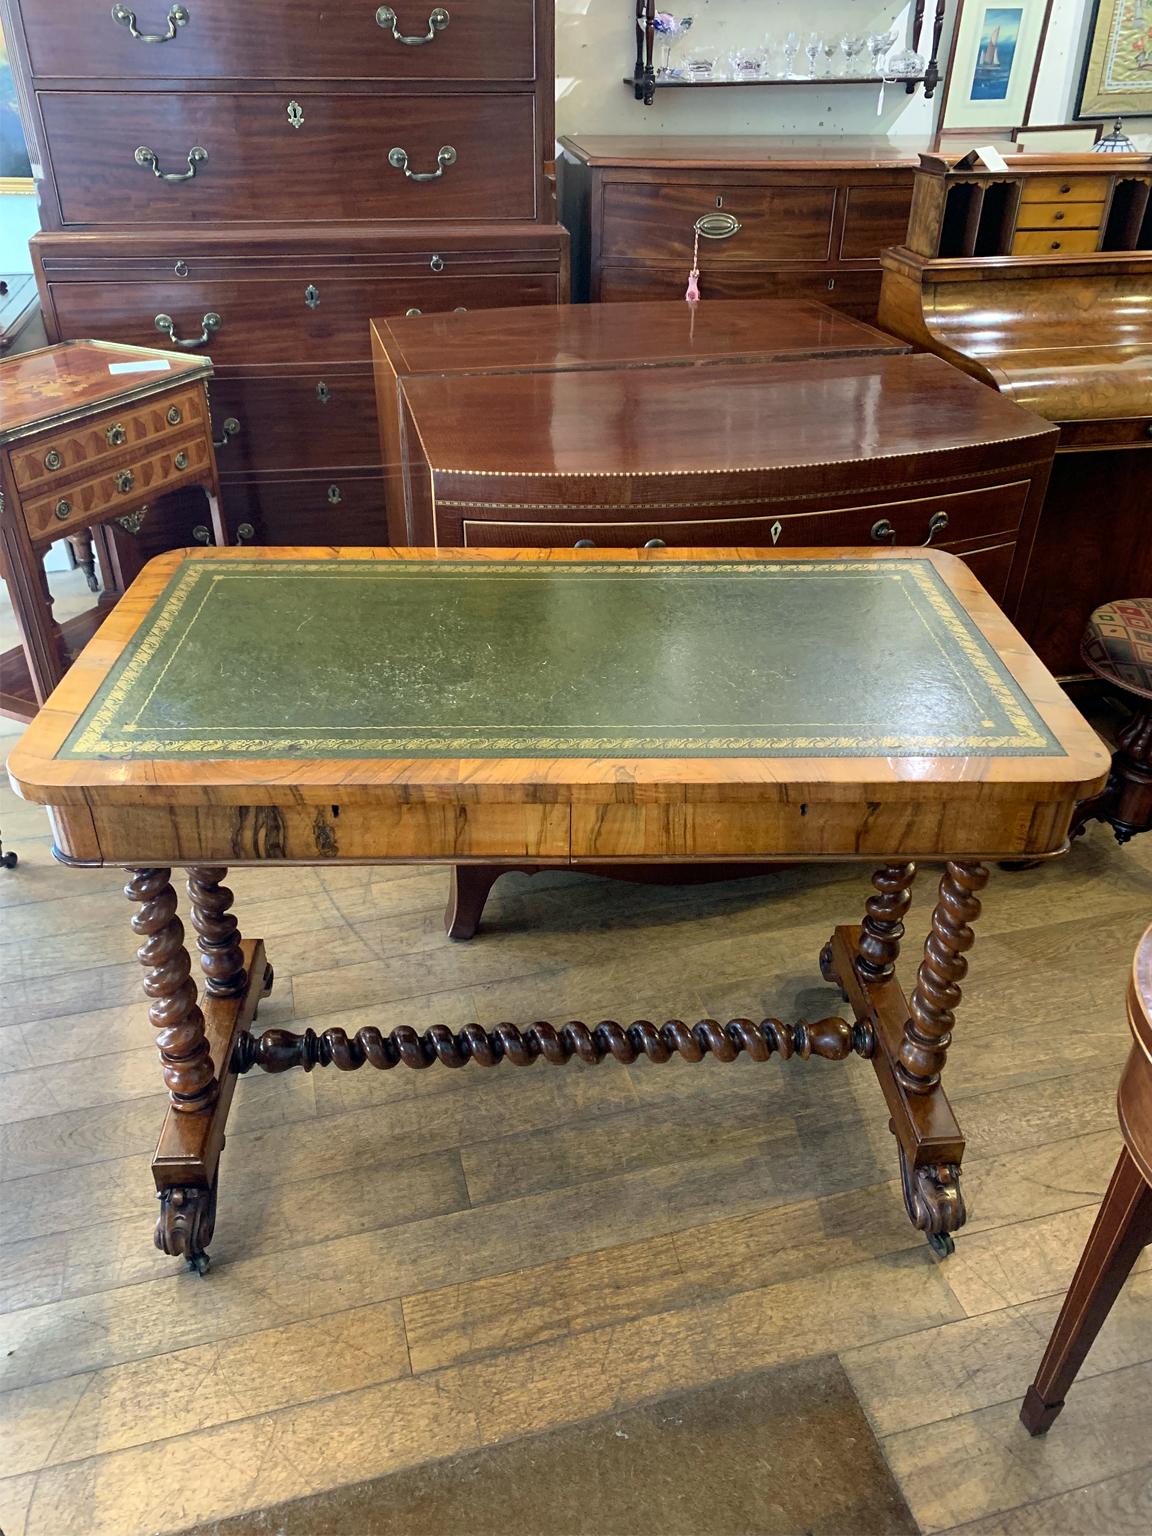 A 19th century Victorian rosewood & mahogany writing table, the top inset with gilt-tooled green leather with two pull out drawers. The turned barley twist supports with finely carved decoration to base on castors.

